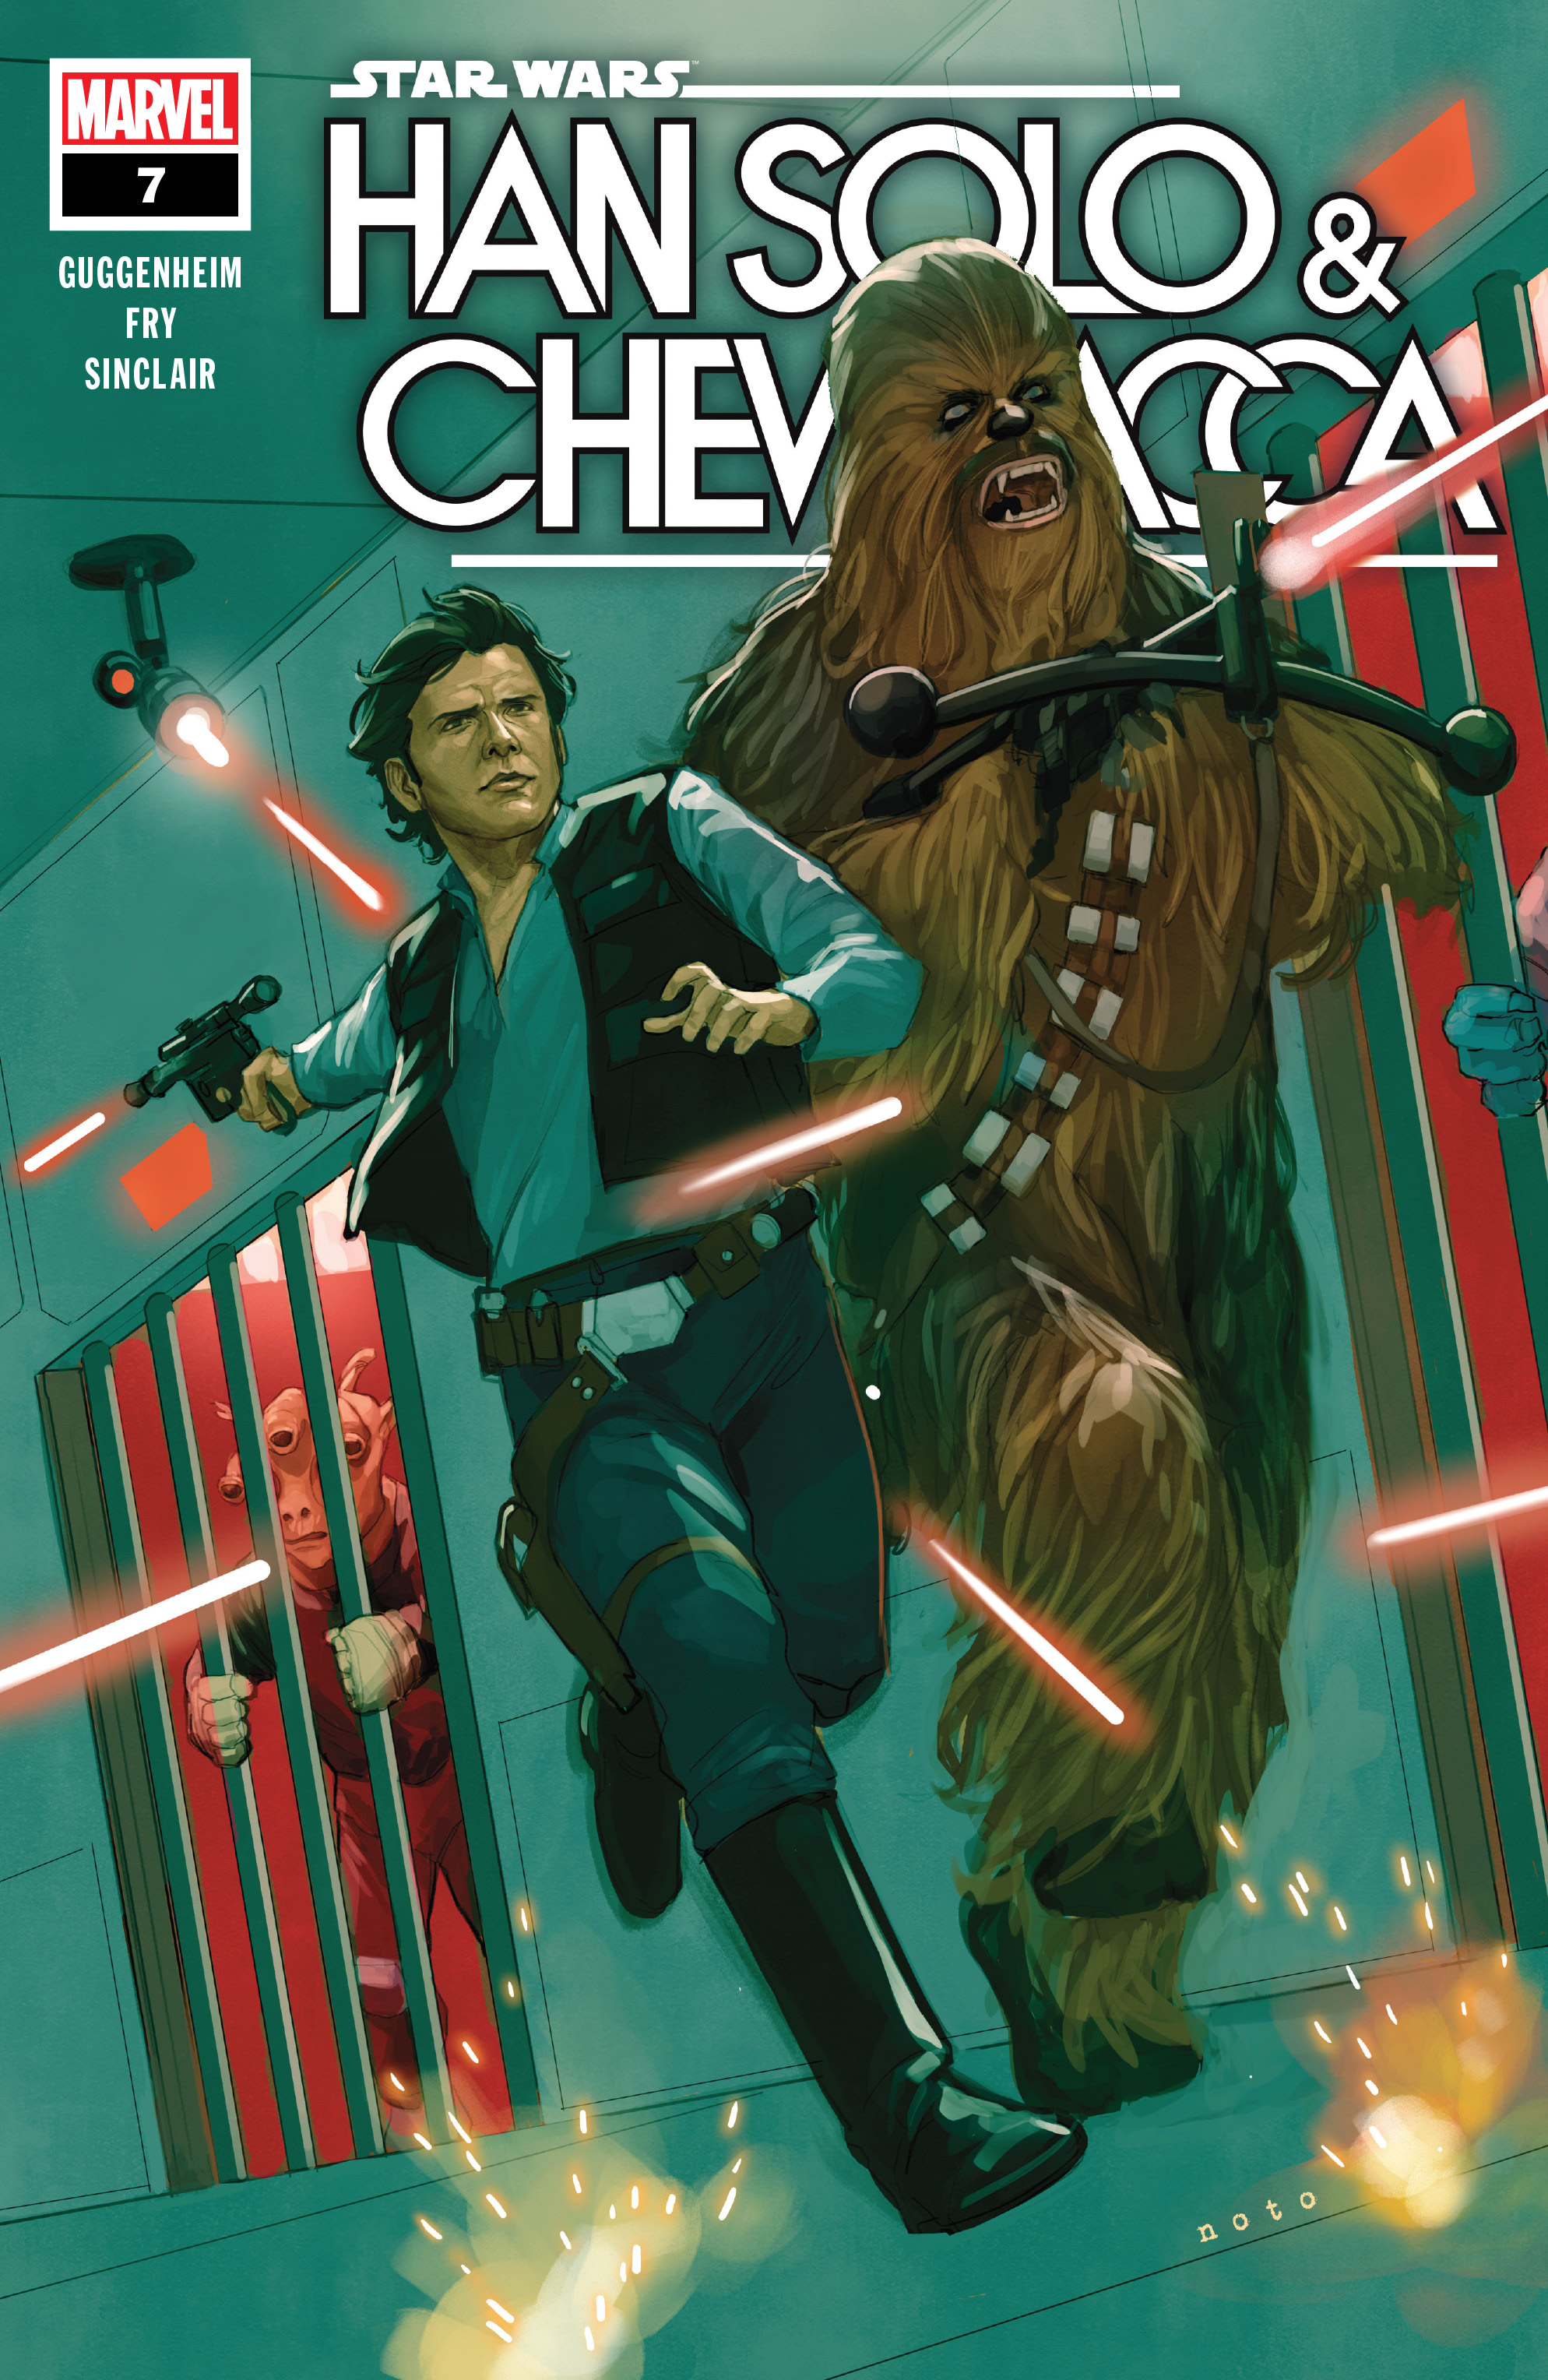 Read online Star Wars: Han Solo & Chewbacca comic -  Issue #7 - 1